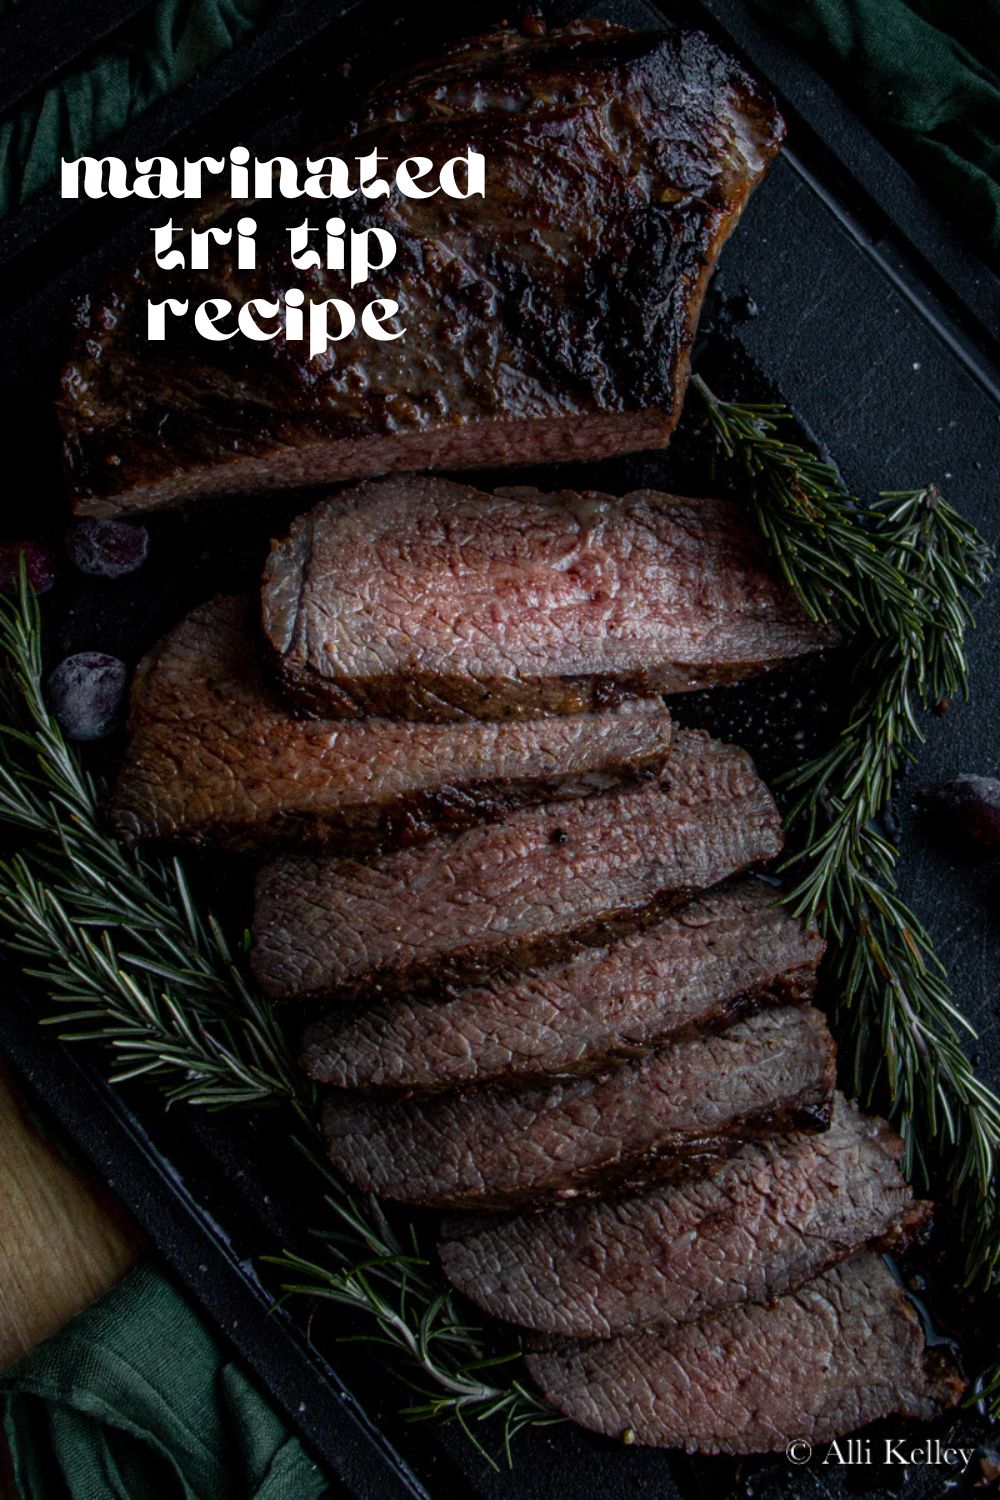 My tri tip recipe is a guaranteed crowd-pleaser! This succulent cut of beef is seasoned with my special tri tip marinade to ensure you get a juicy, flavorful bite every time. With the outside perfectly browned and the inside wonderfully tender, your tri tip roast will be the star of any dinner table!